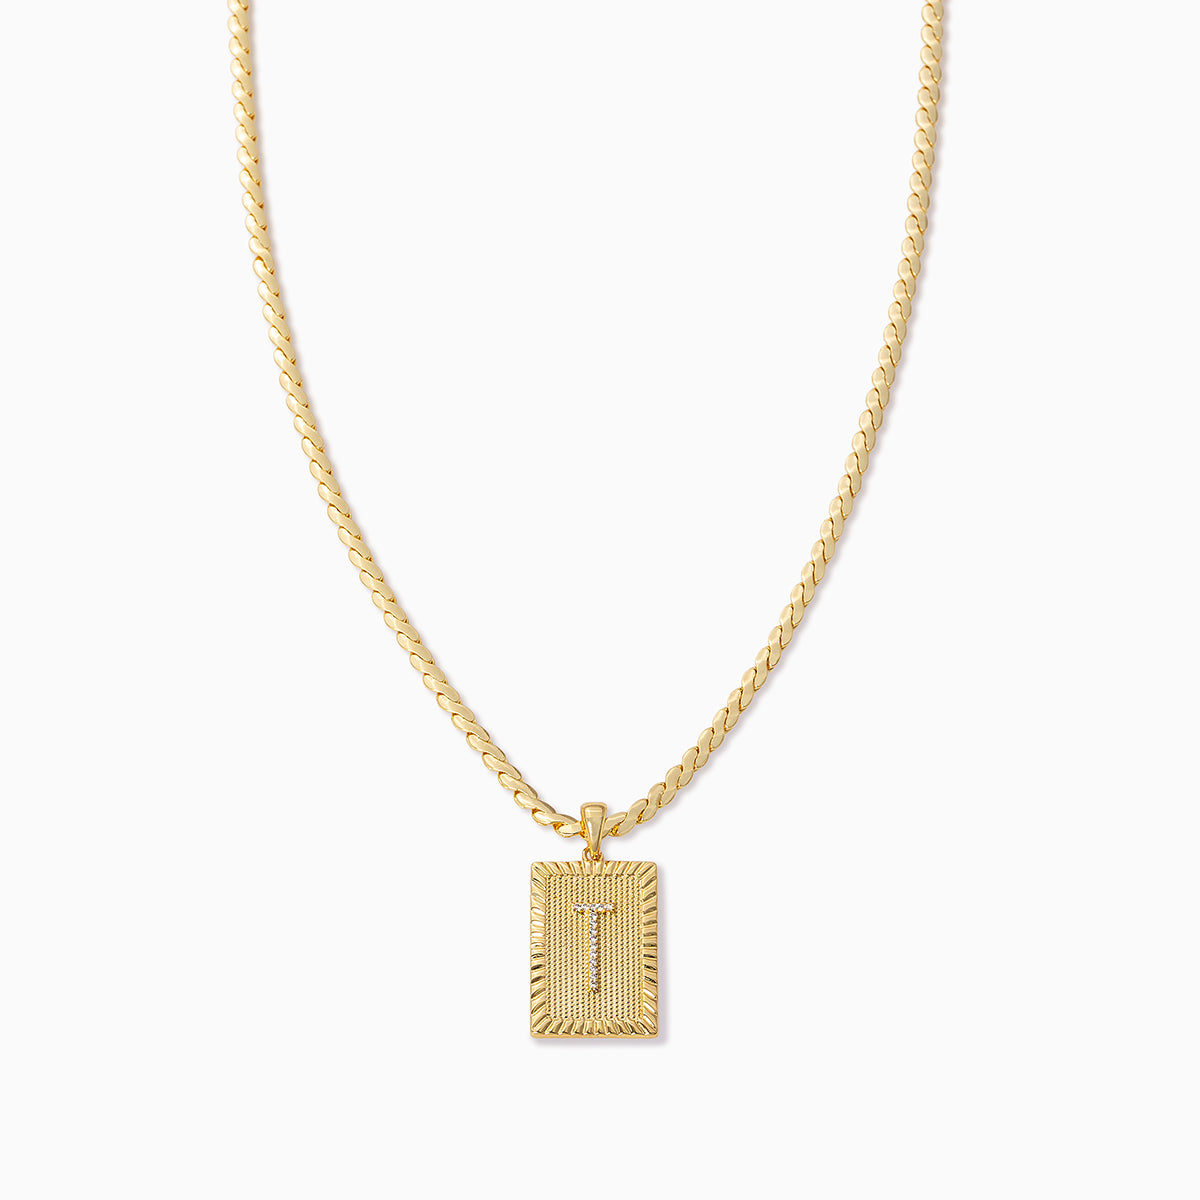 Bestyle Stainless Steel Initial Necklace Men Women Letter T Pendant Necklace  Love Name Statement Couple Necklace Chain for Boys Girls - Gold -  Walmart.com